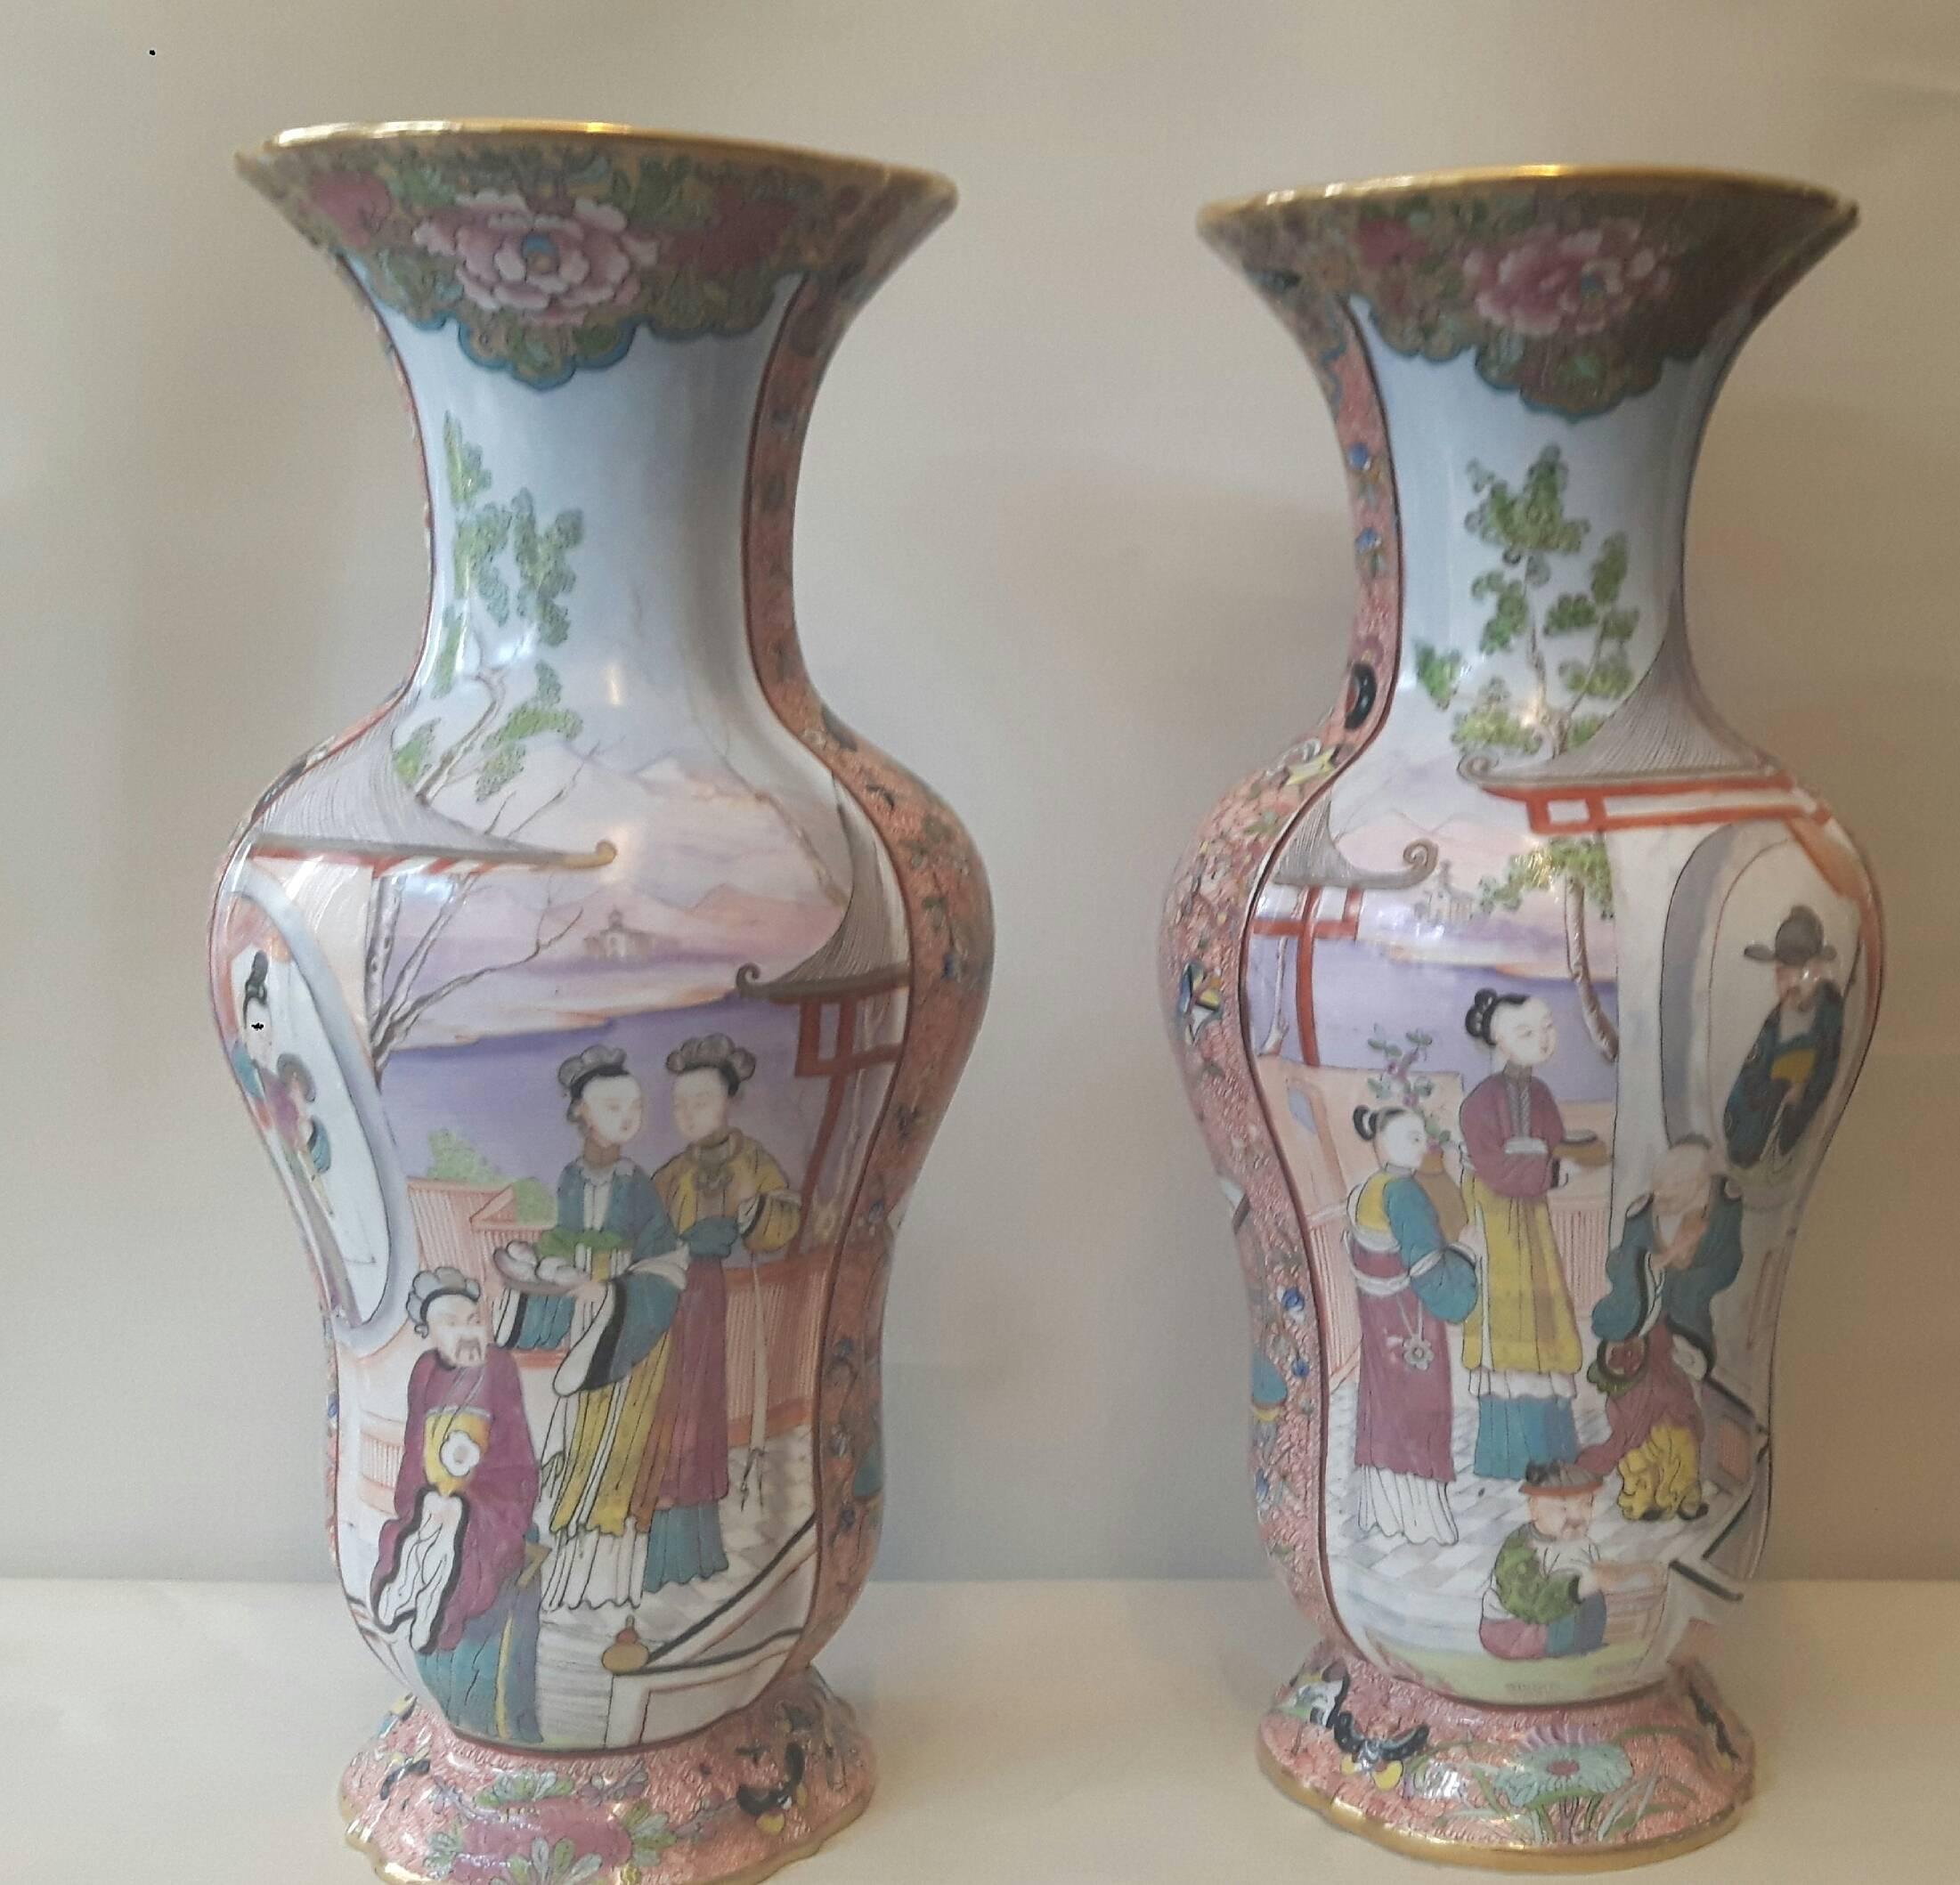 Neoclassical Highly Decorative Pair of 19th Century French Vases